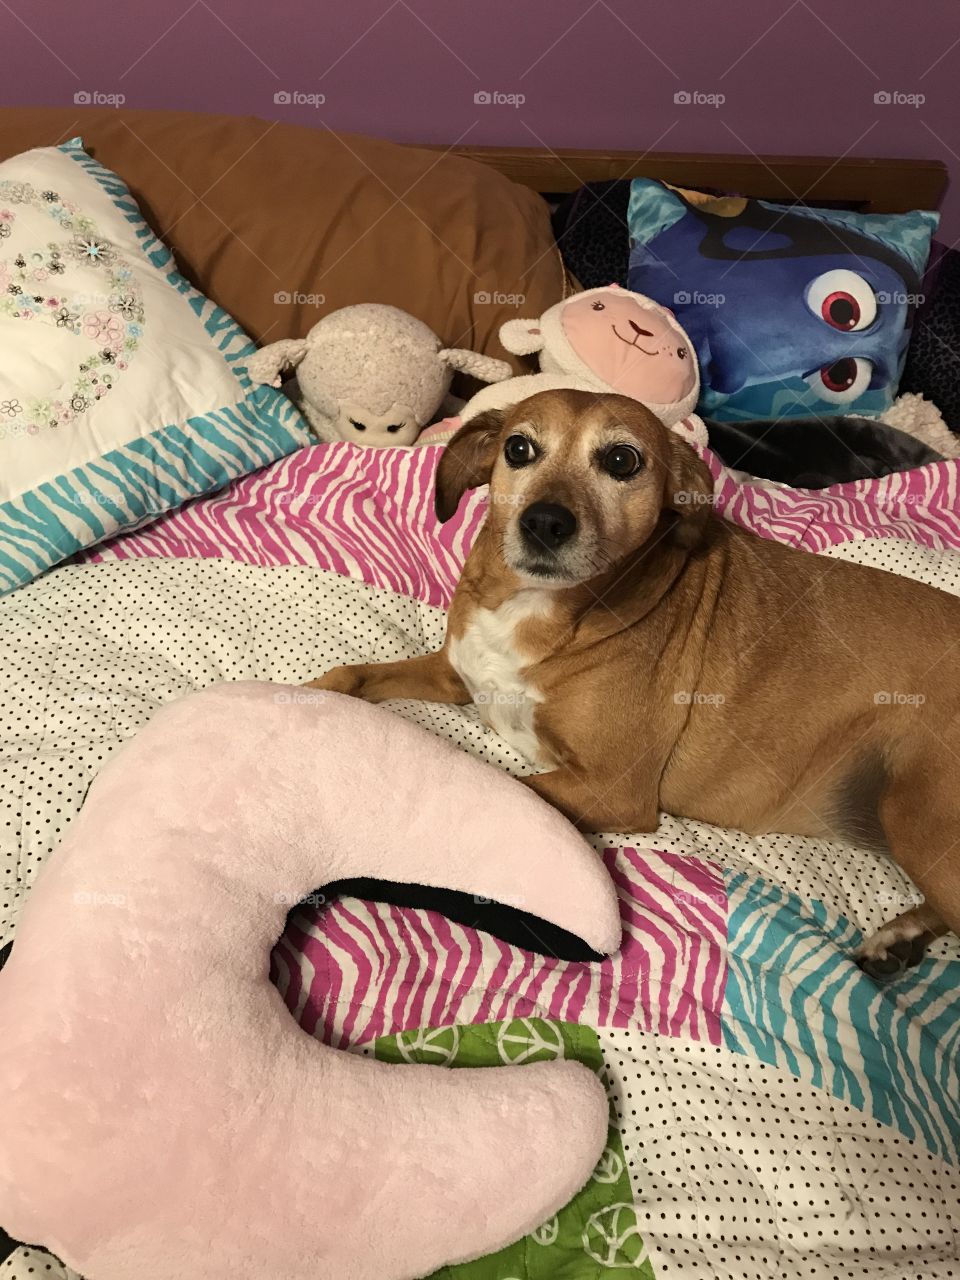 “No, I will not look at the camera because I’m pretending to be a stuffed animal so you do not notice me and move my dog self off this comfy bed.”